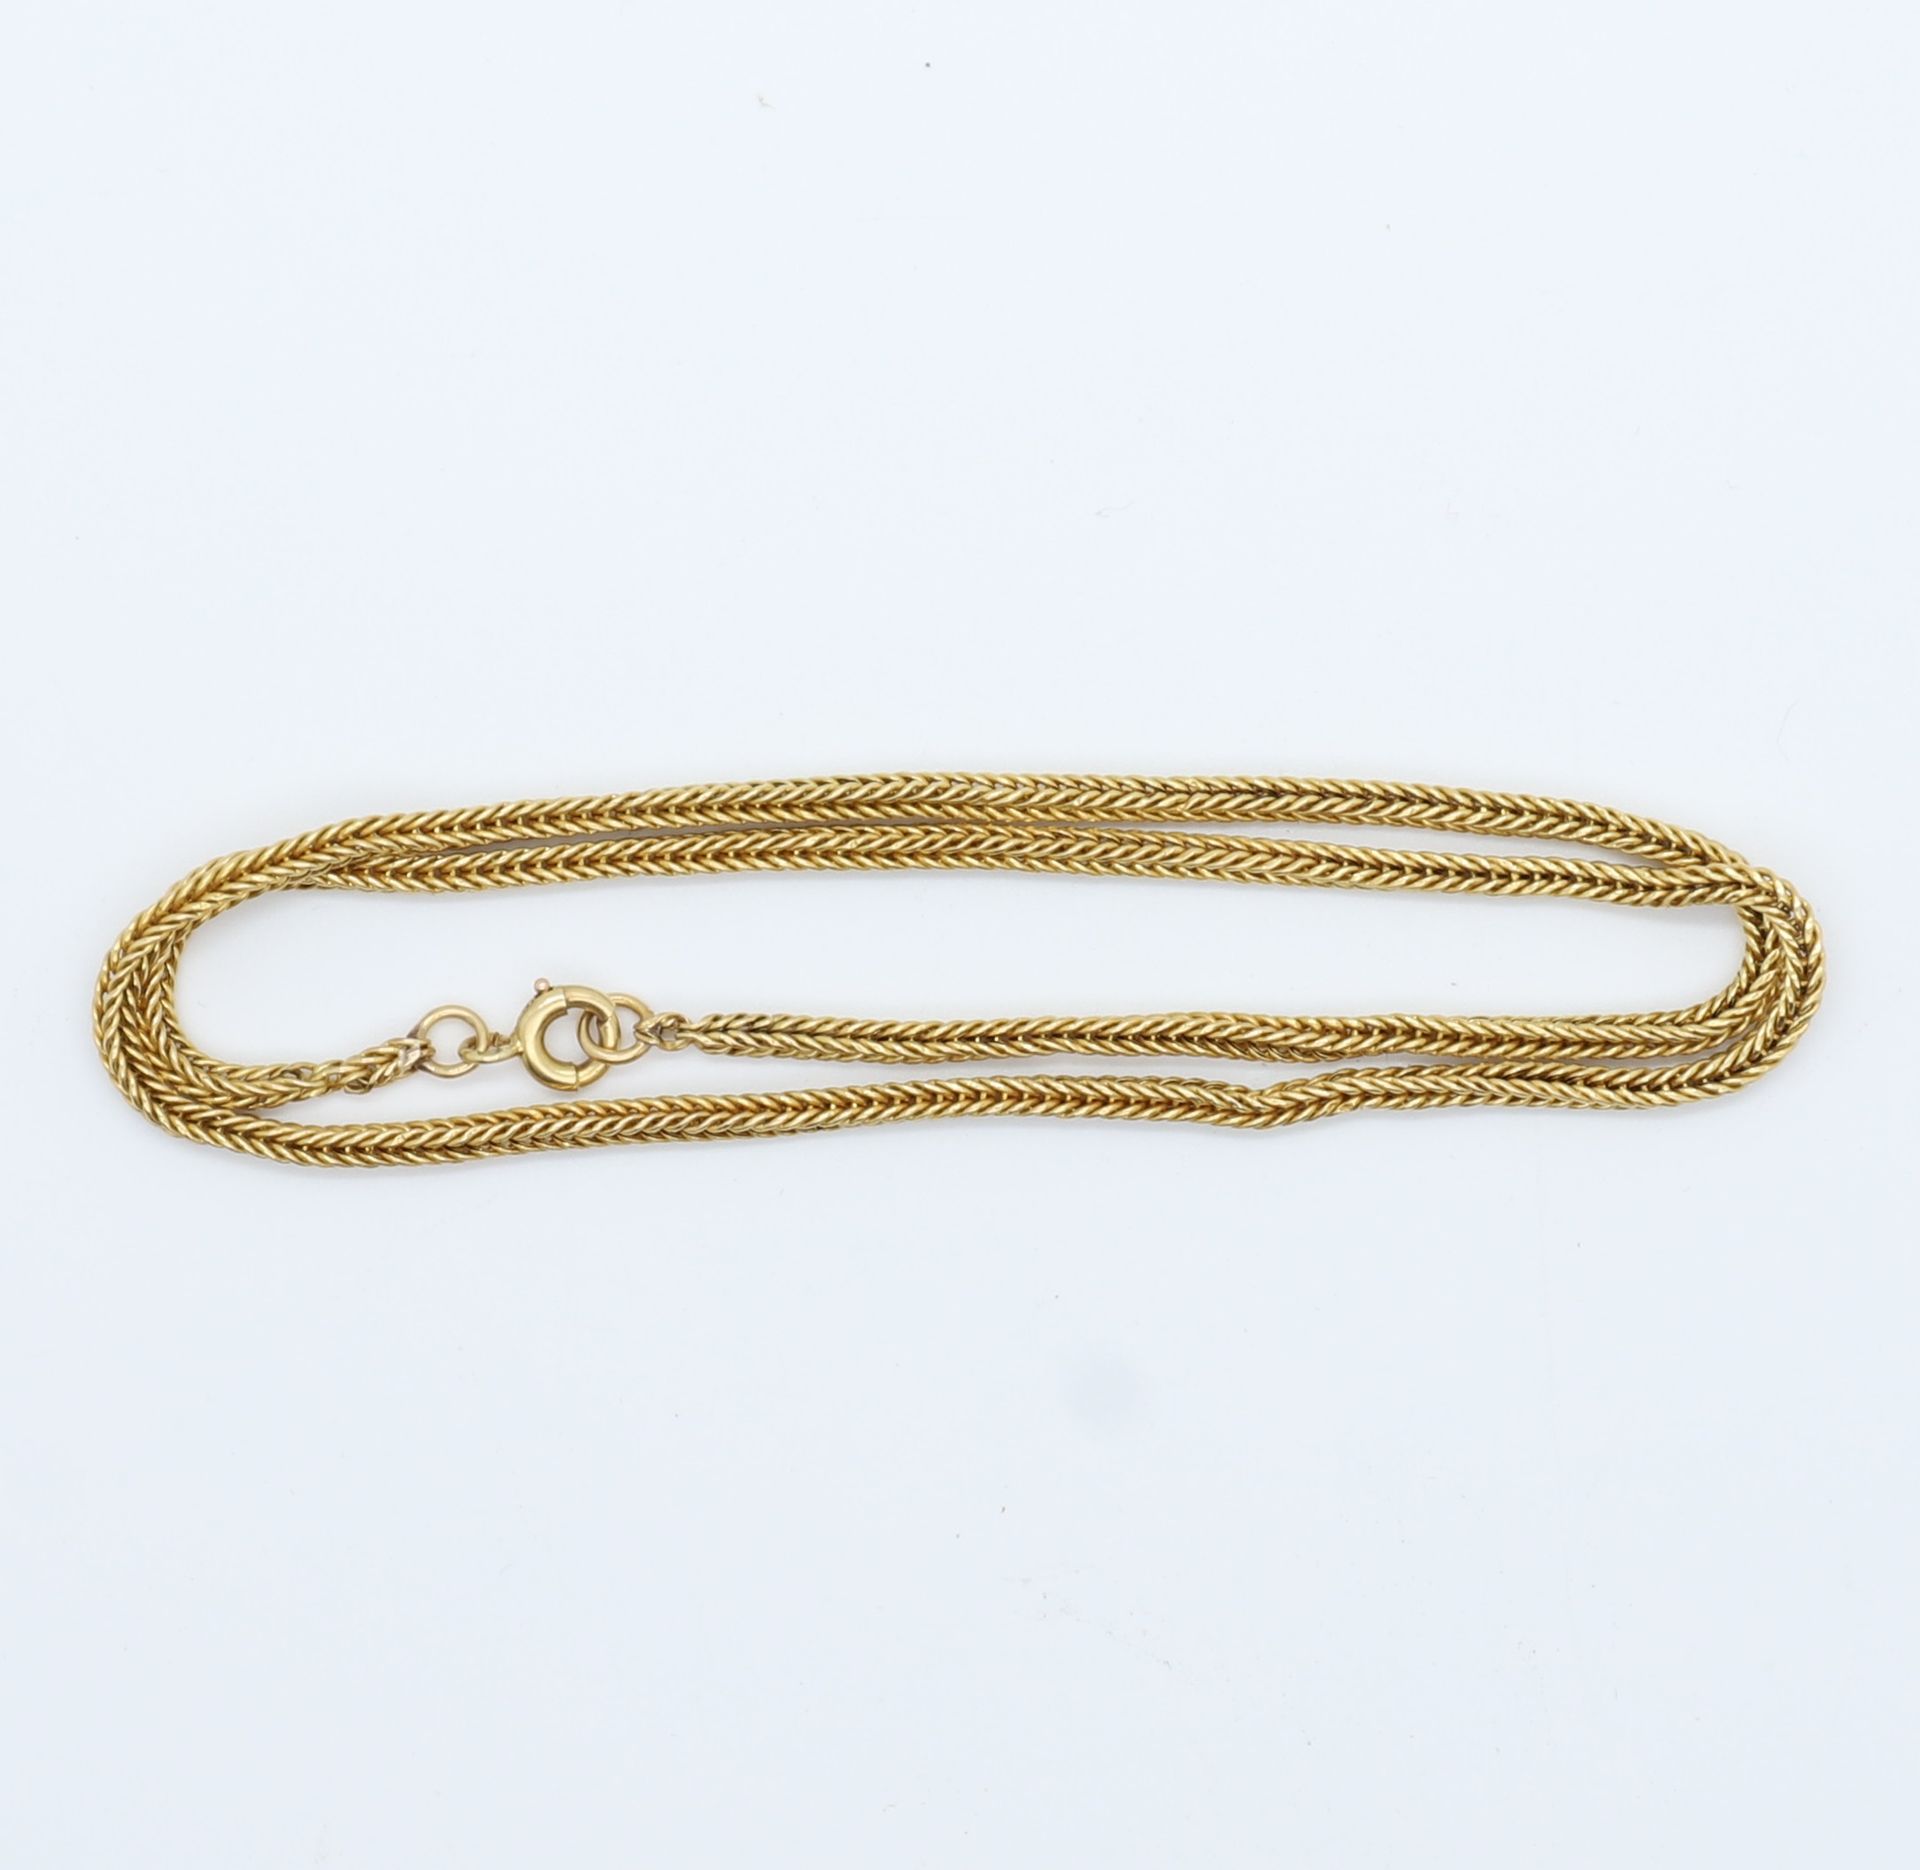 Null YELLOW GOLD CHAIN WITH "CHEVRON" LINKS
Marked with an eagle's head
L : 37 c&hellip;